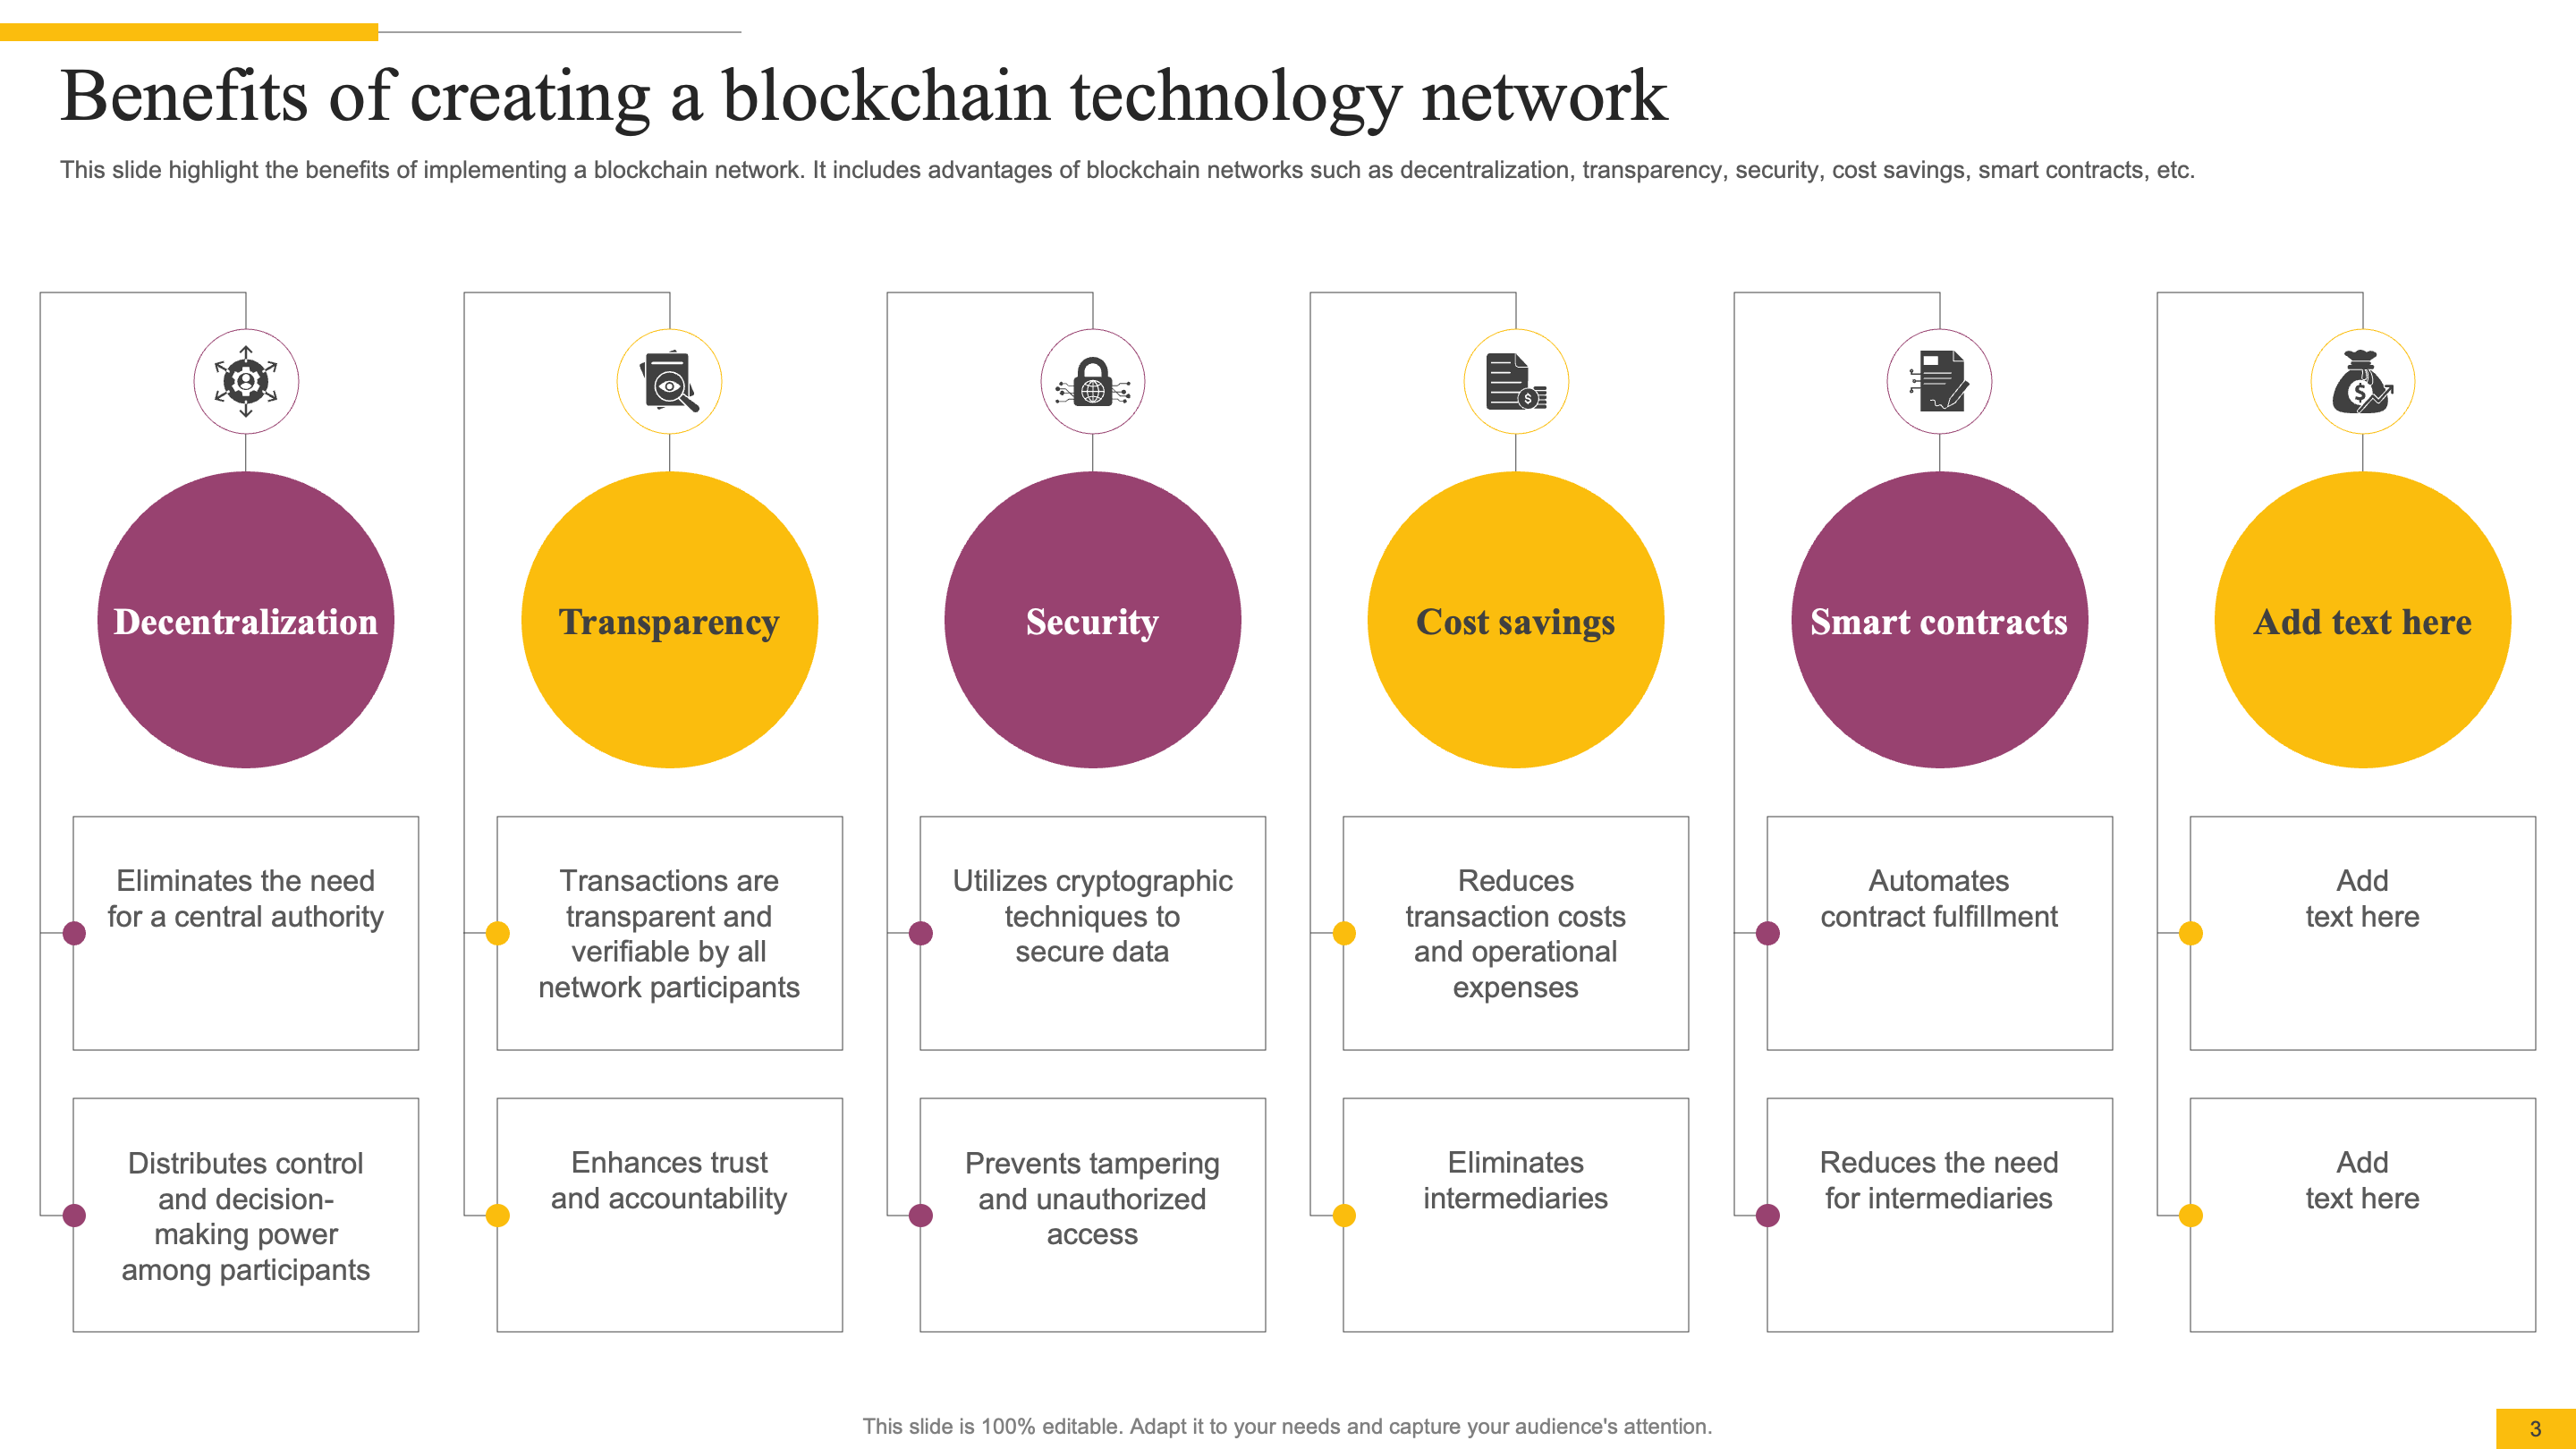 Benefits of creating a blockchain technology network